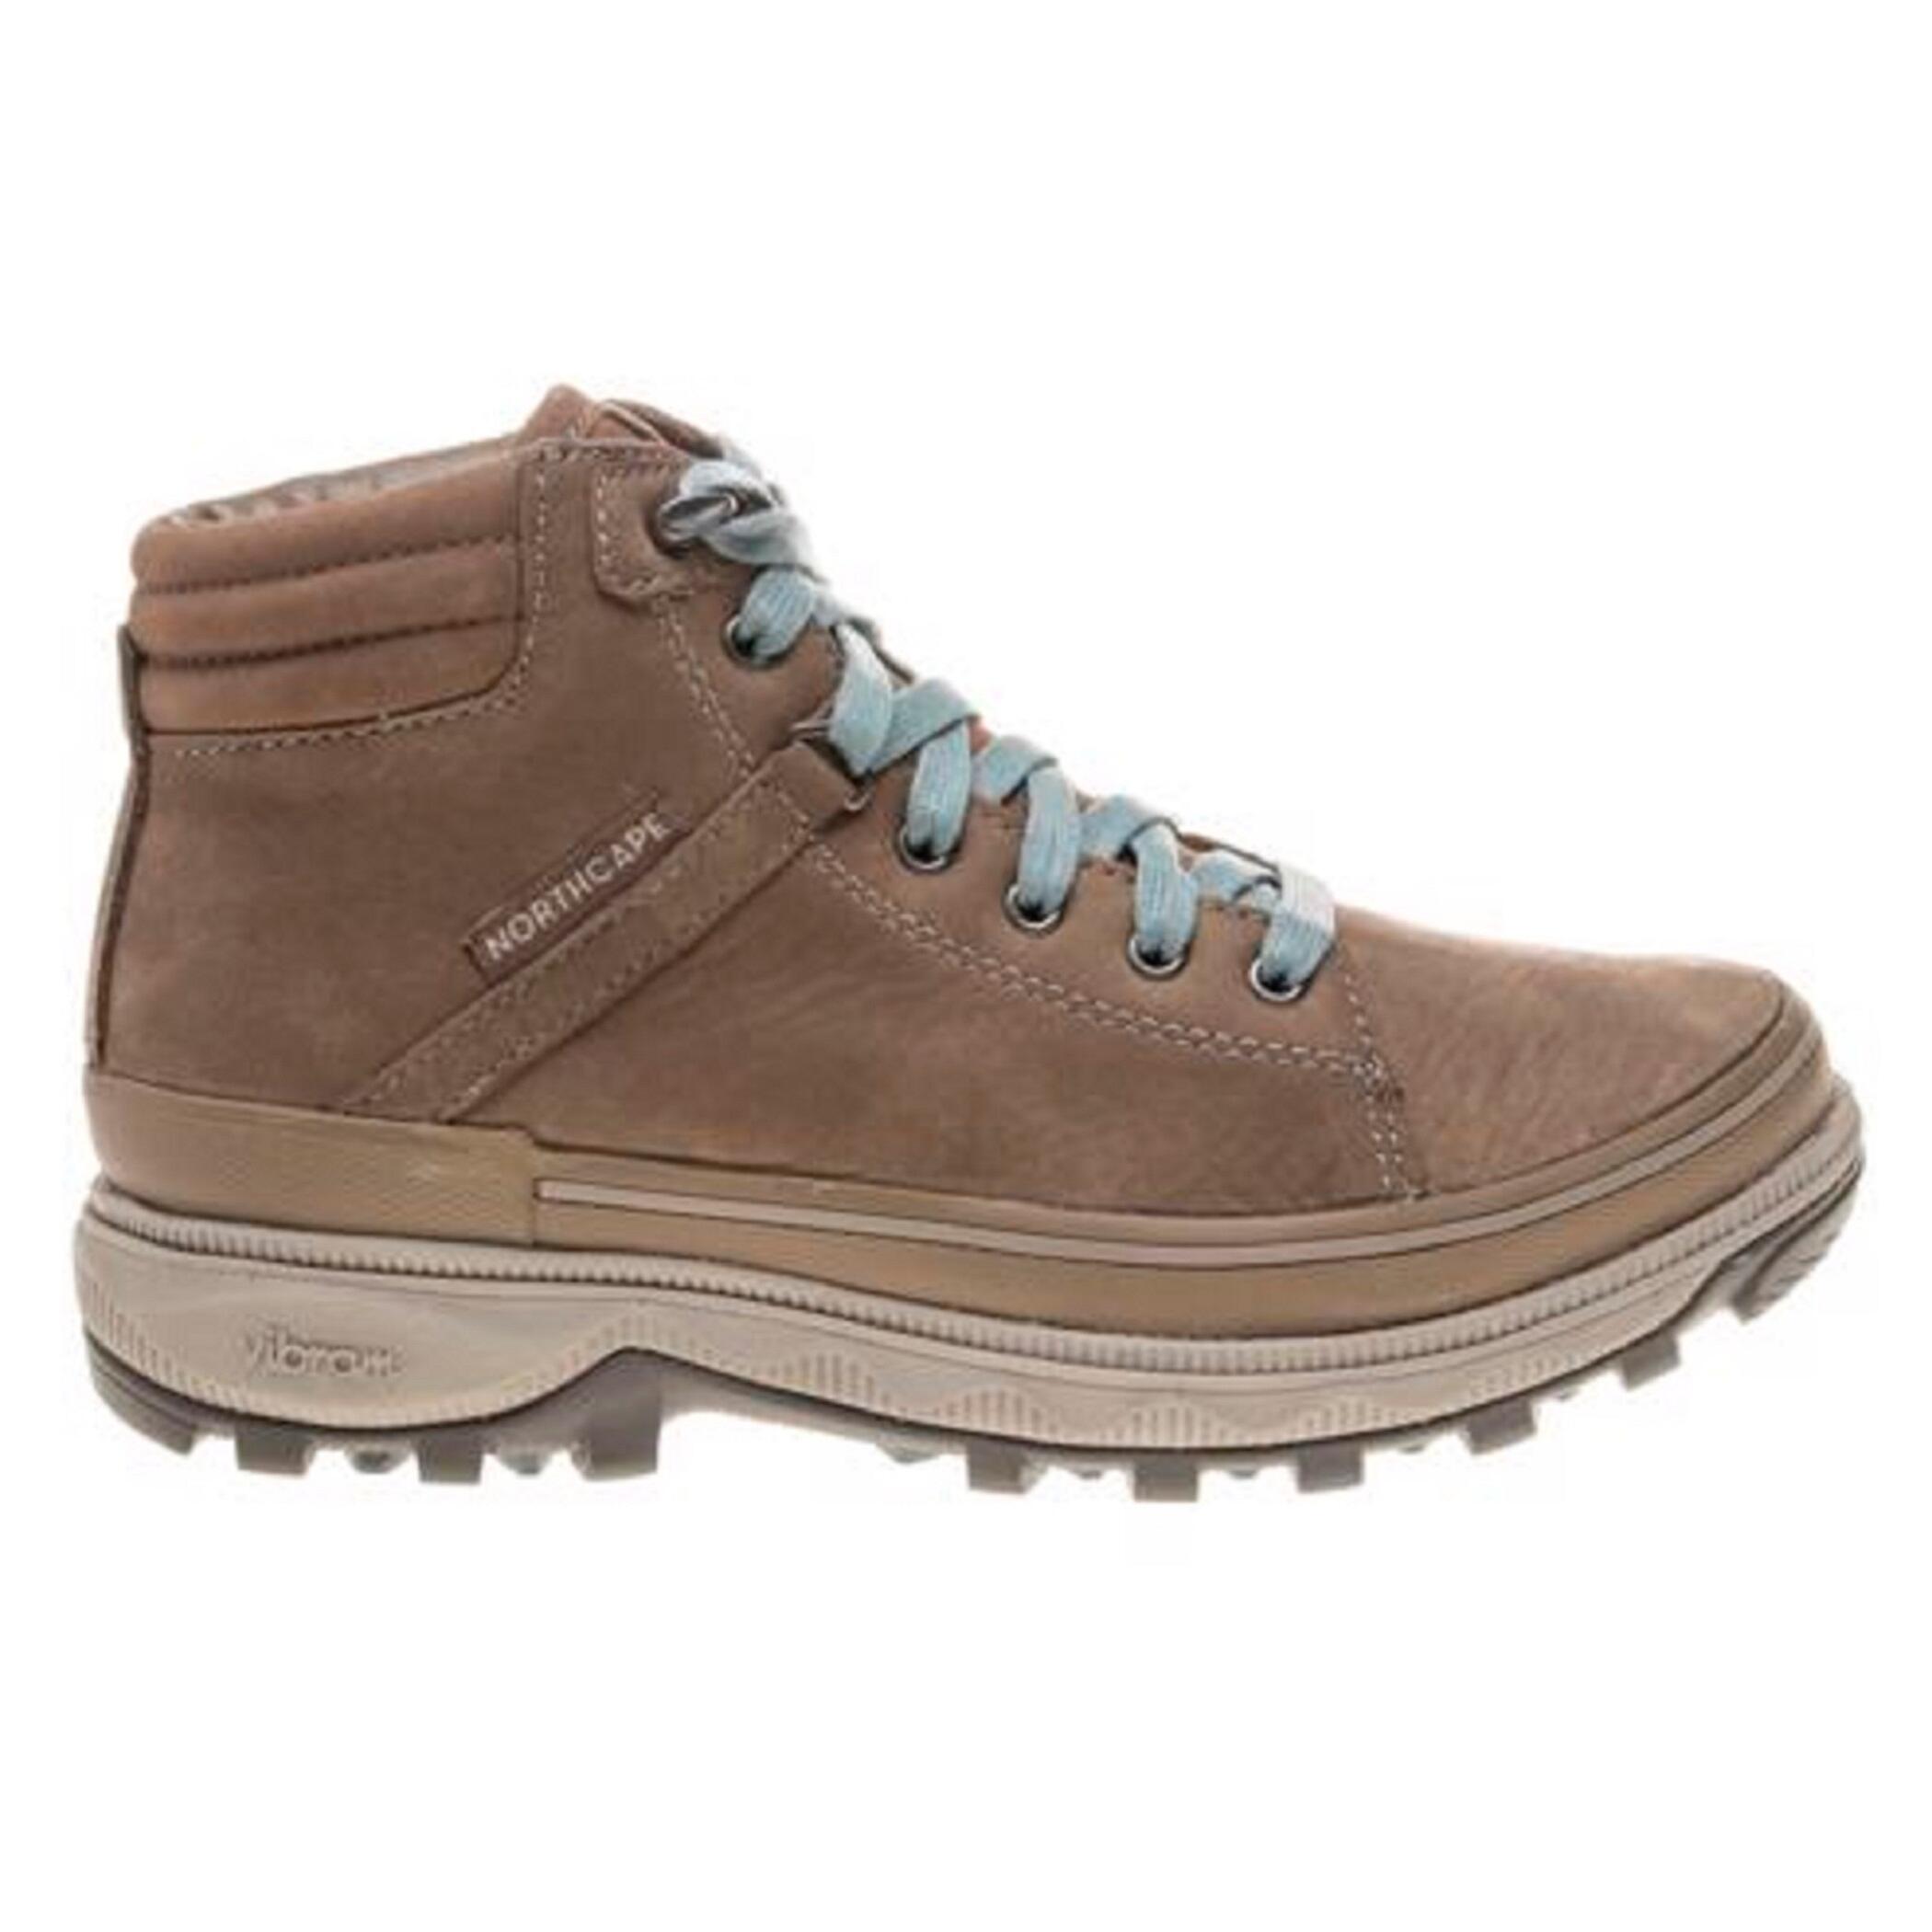 Women's walking boots - Northcape Shale - brown 2/5